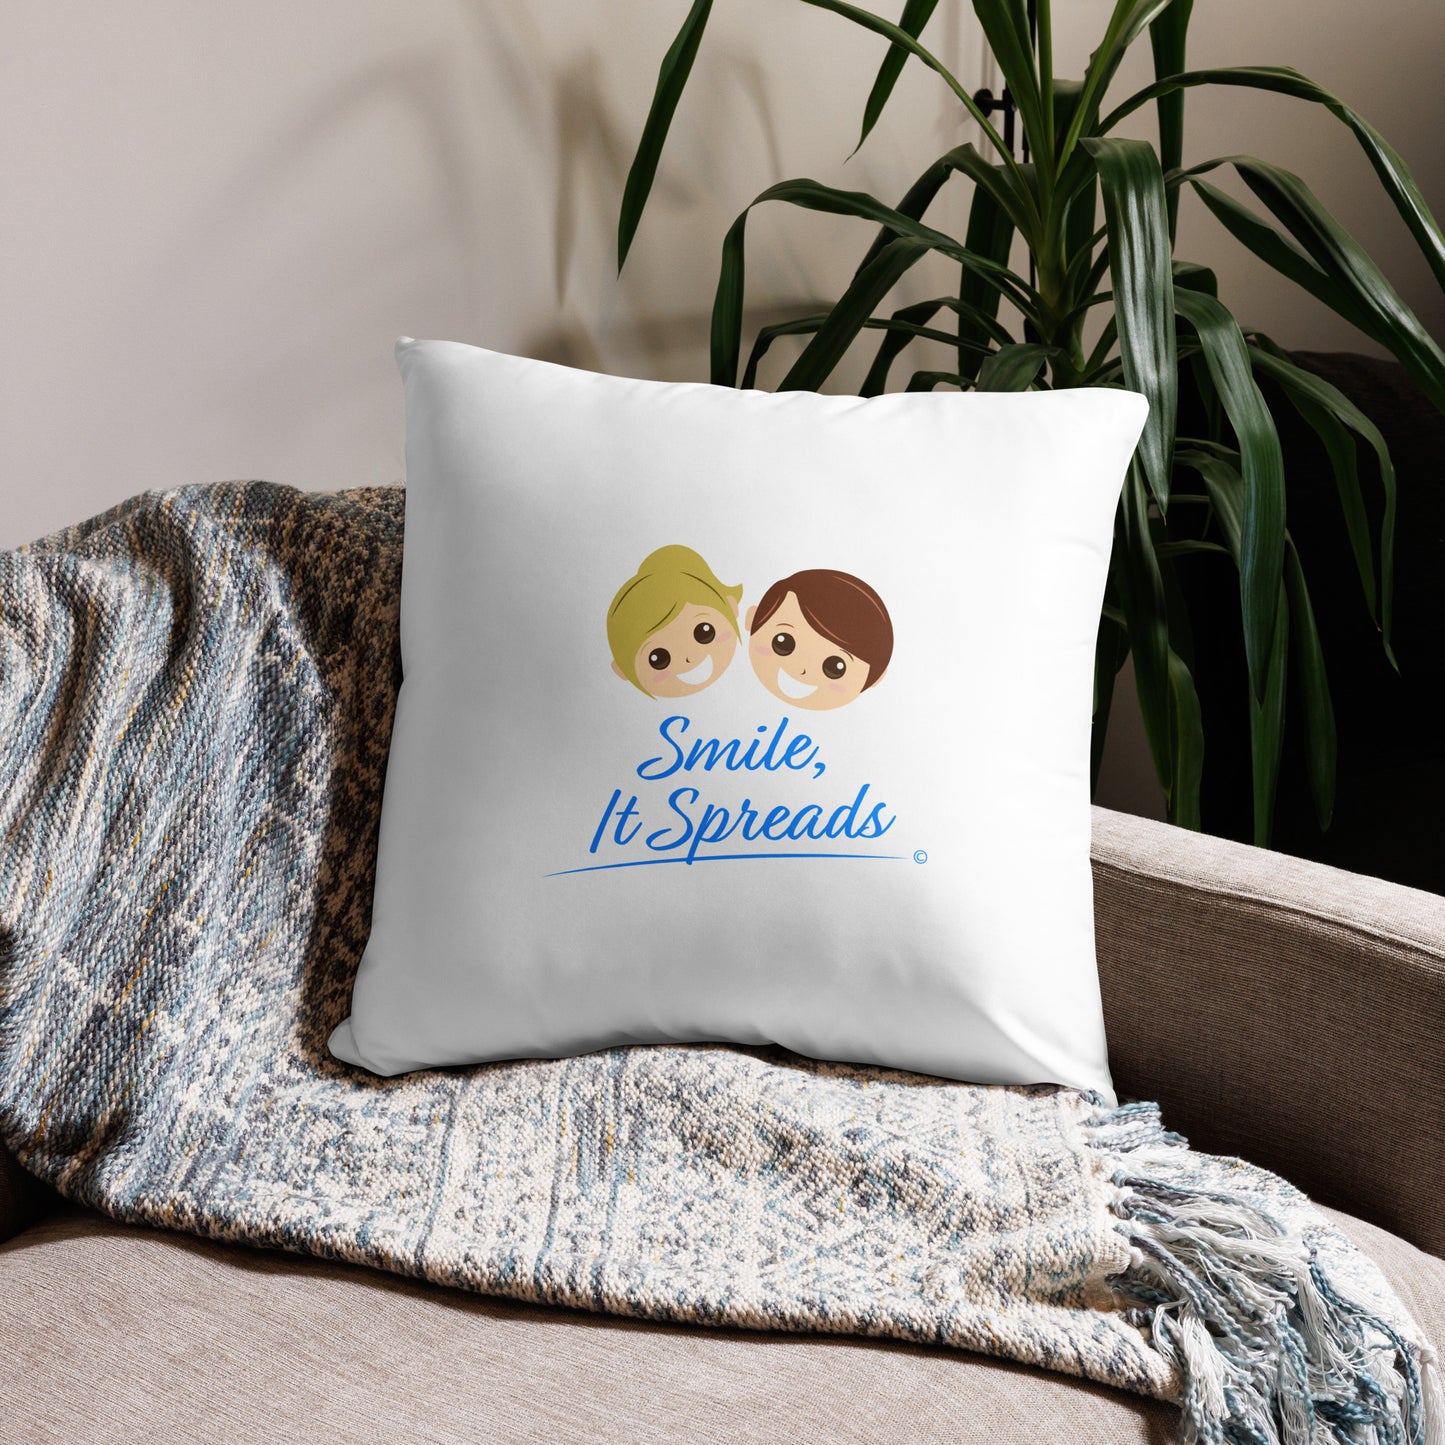 Smile, It Spreads Basic Pillows